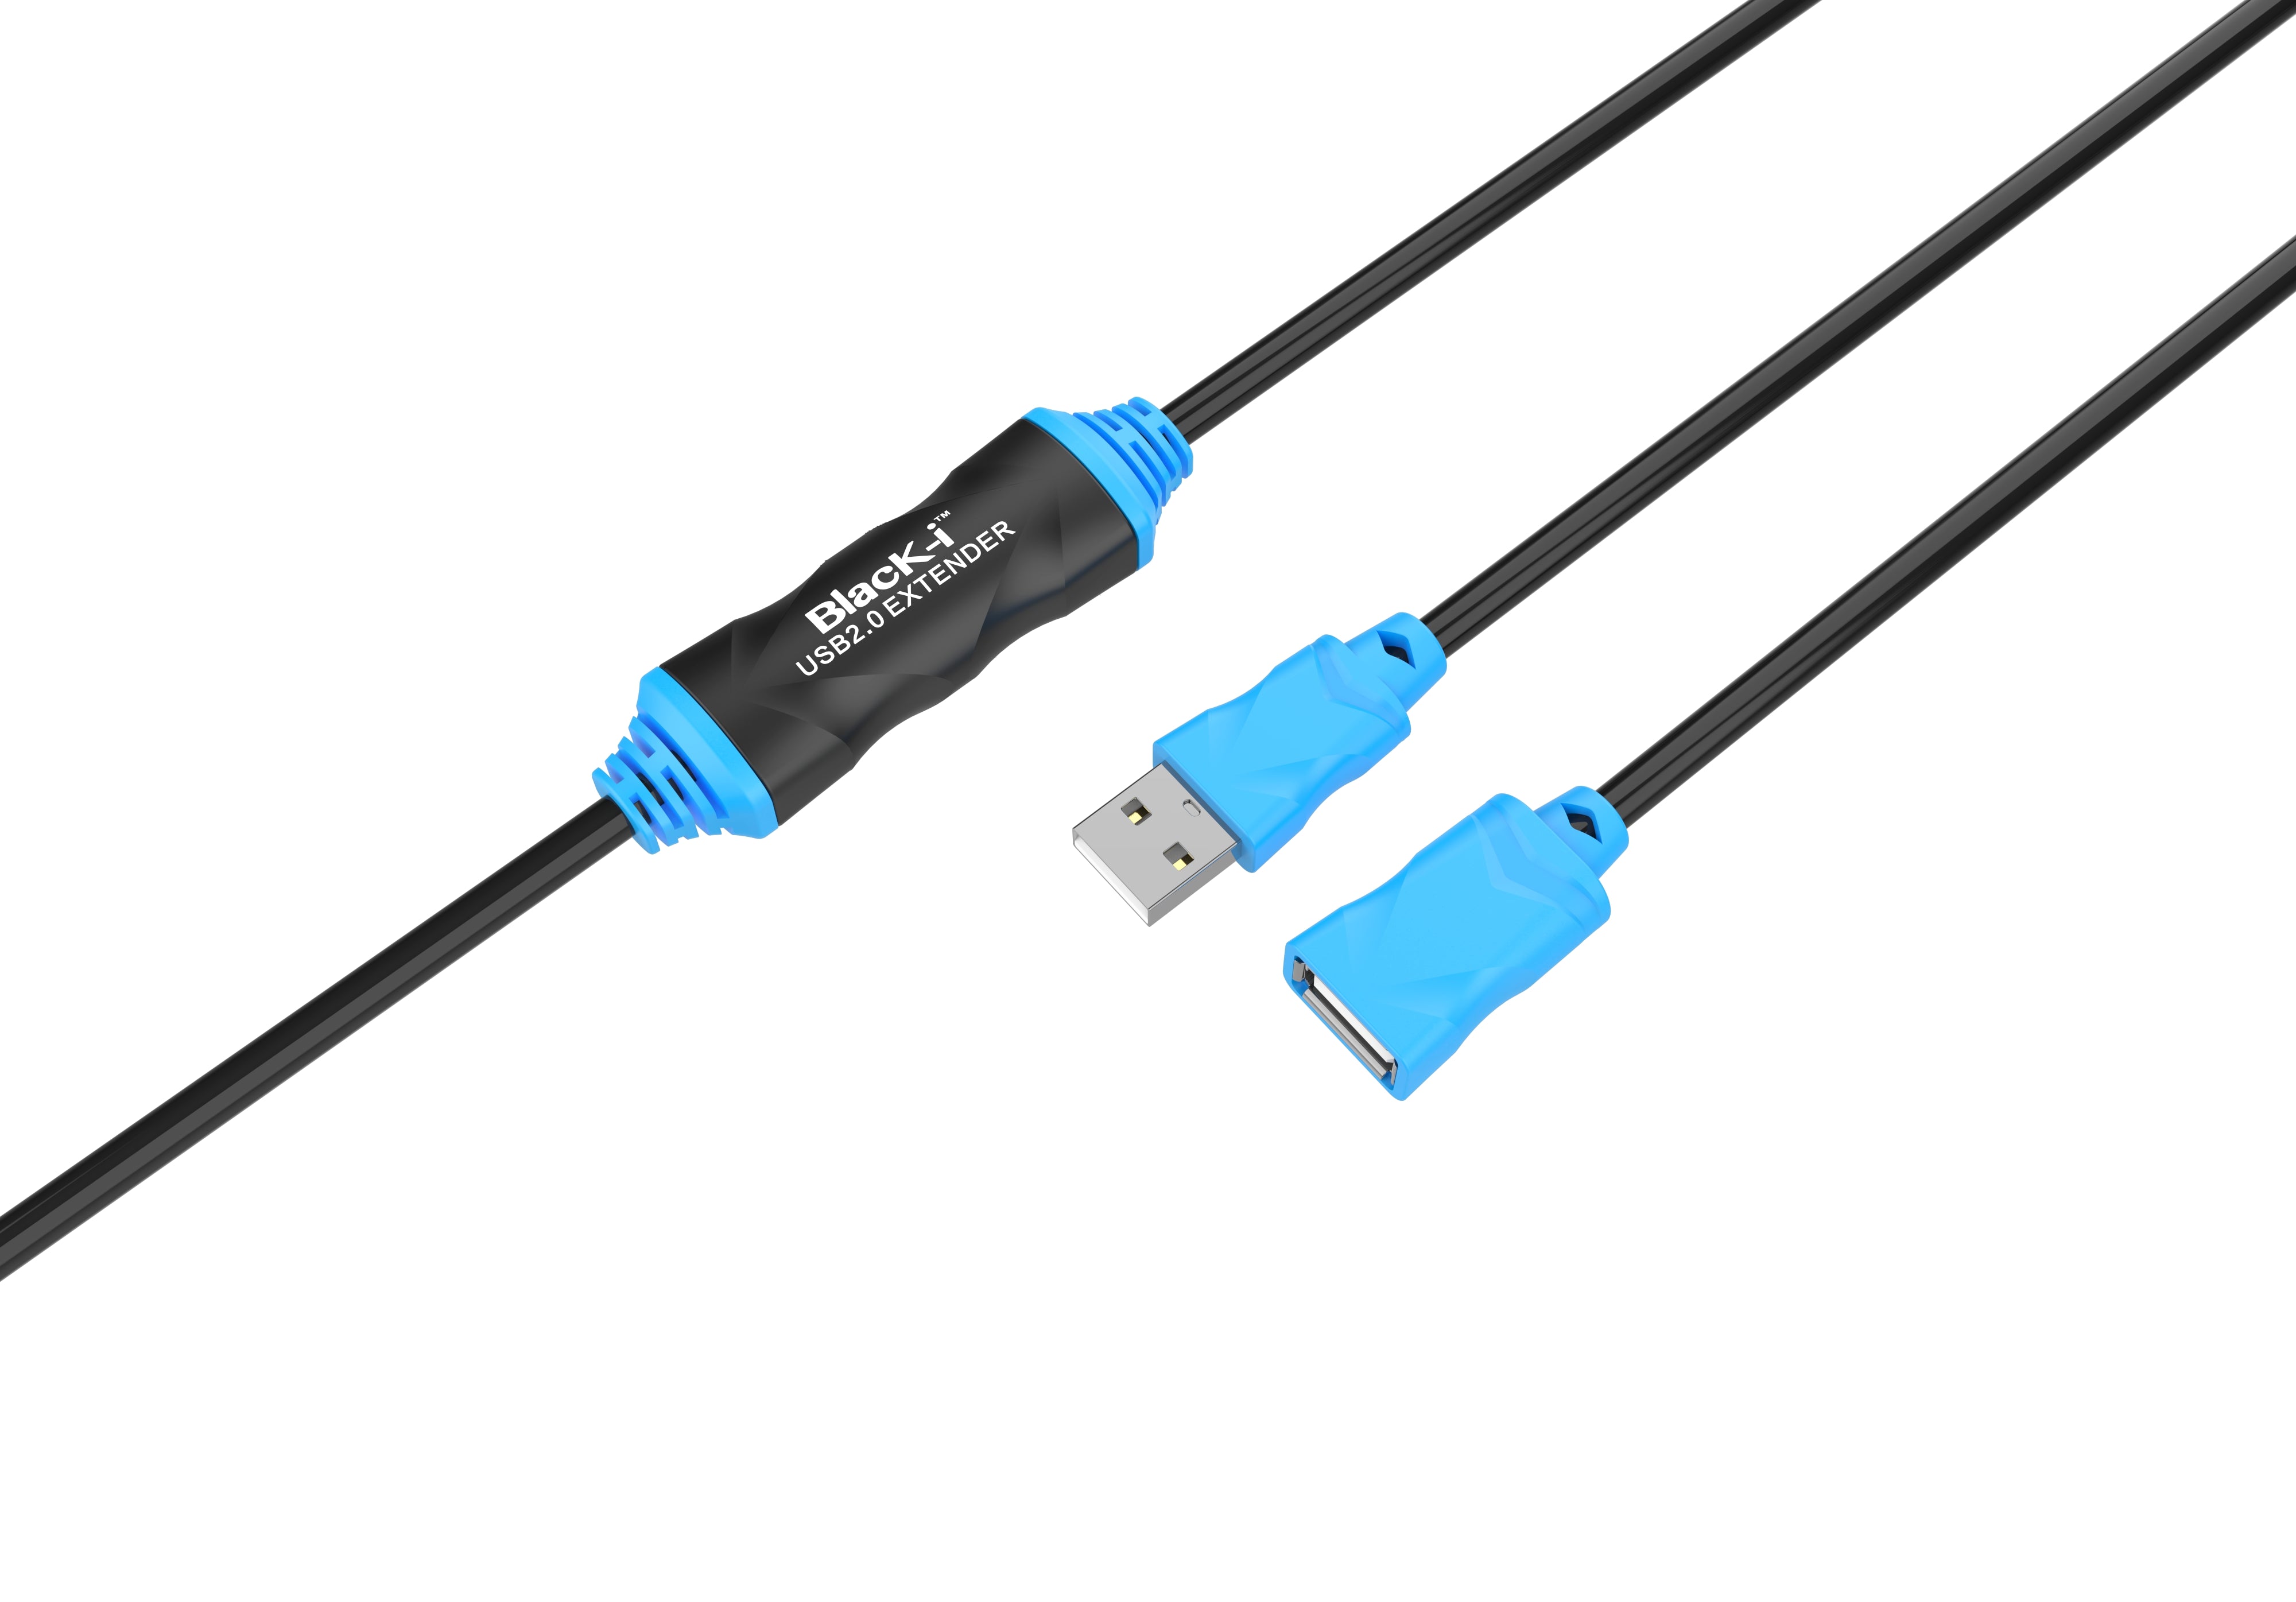 Black-i USB 2.0 Extension Cables with Amplifier – Extend and Boost Your Connectivity for Enhanced Data Transmission